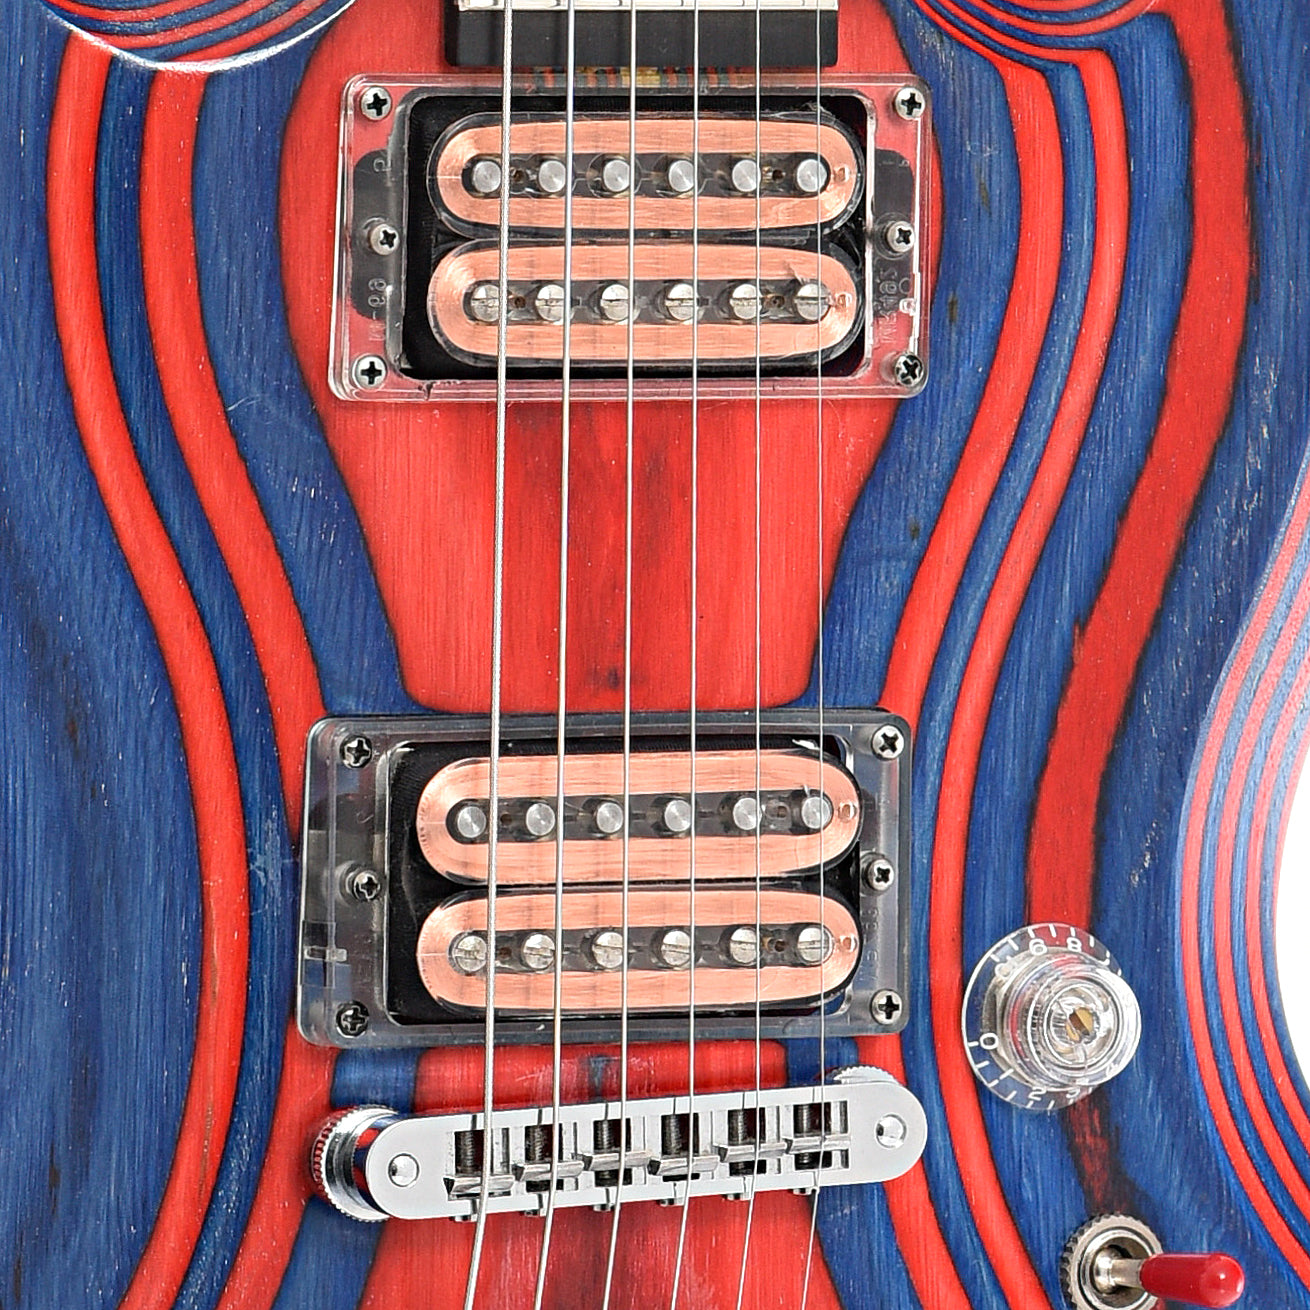 Pickups of Gibson Zoot Suit SG Electric Guitar (2009)